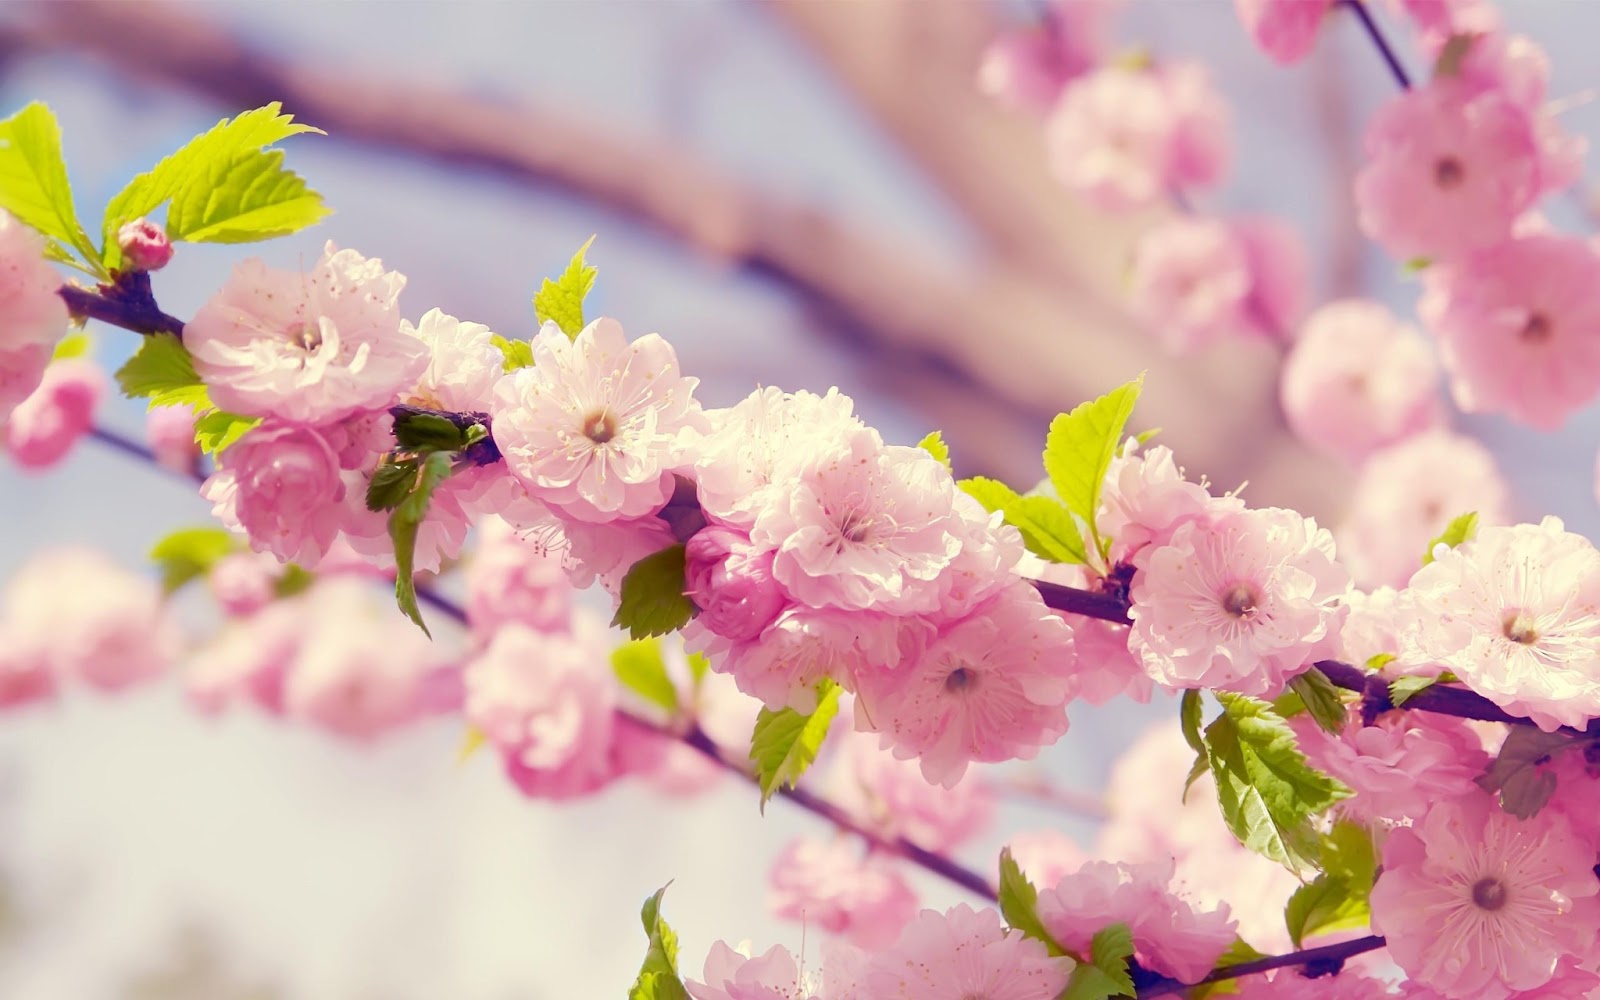 Remarkable Cute Wallpaper With Flowers Te Image